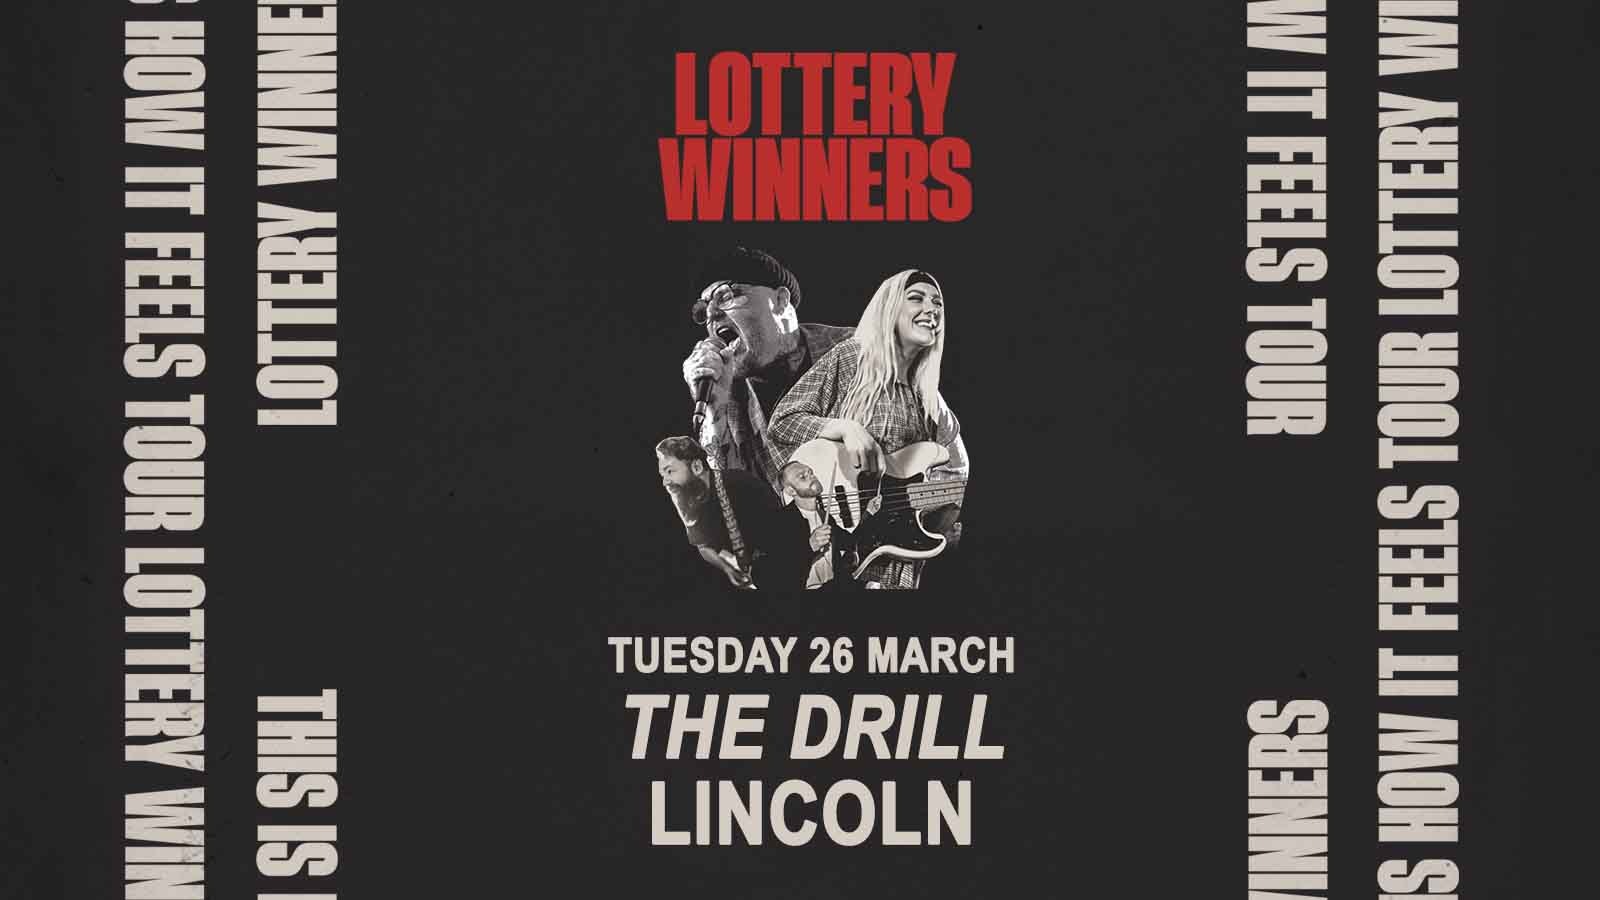 Lottery Winners at The Drill, Lincoln